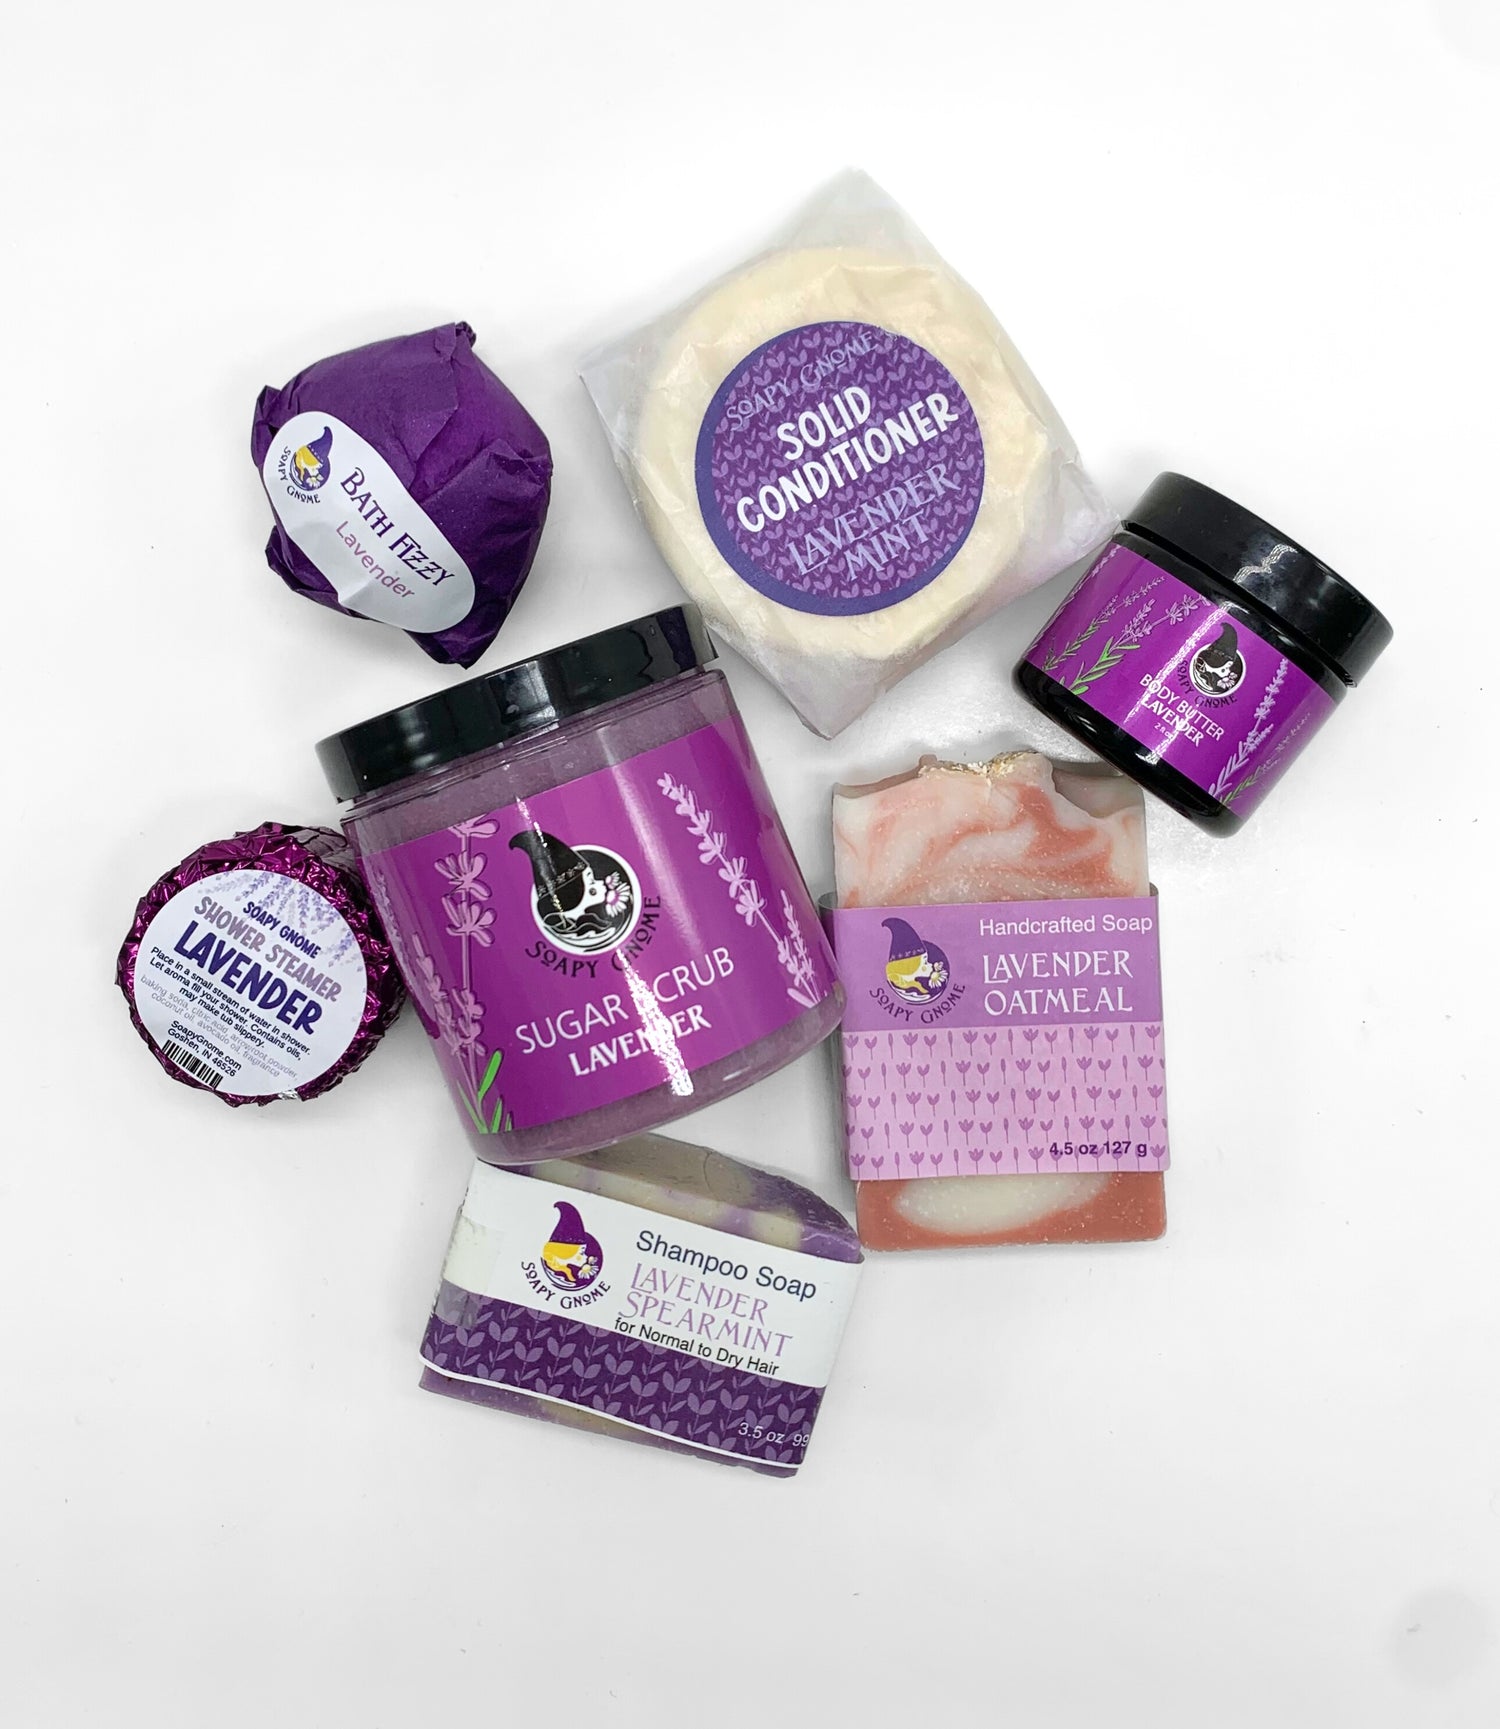 Assortment of Soapy Gnome Lavender products displayed on white background